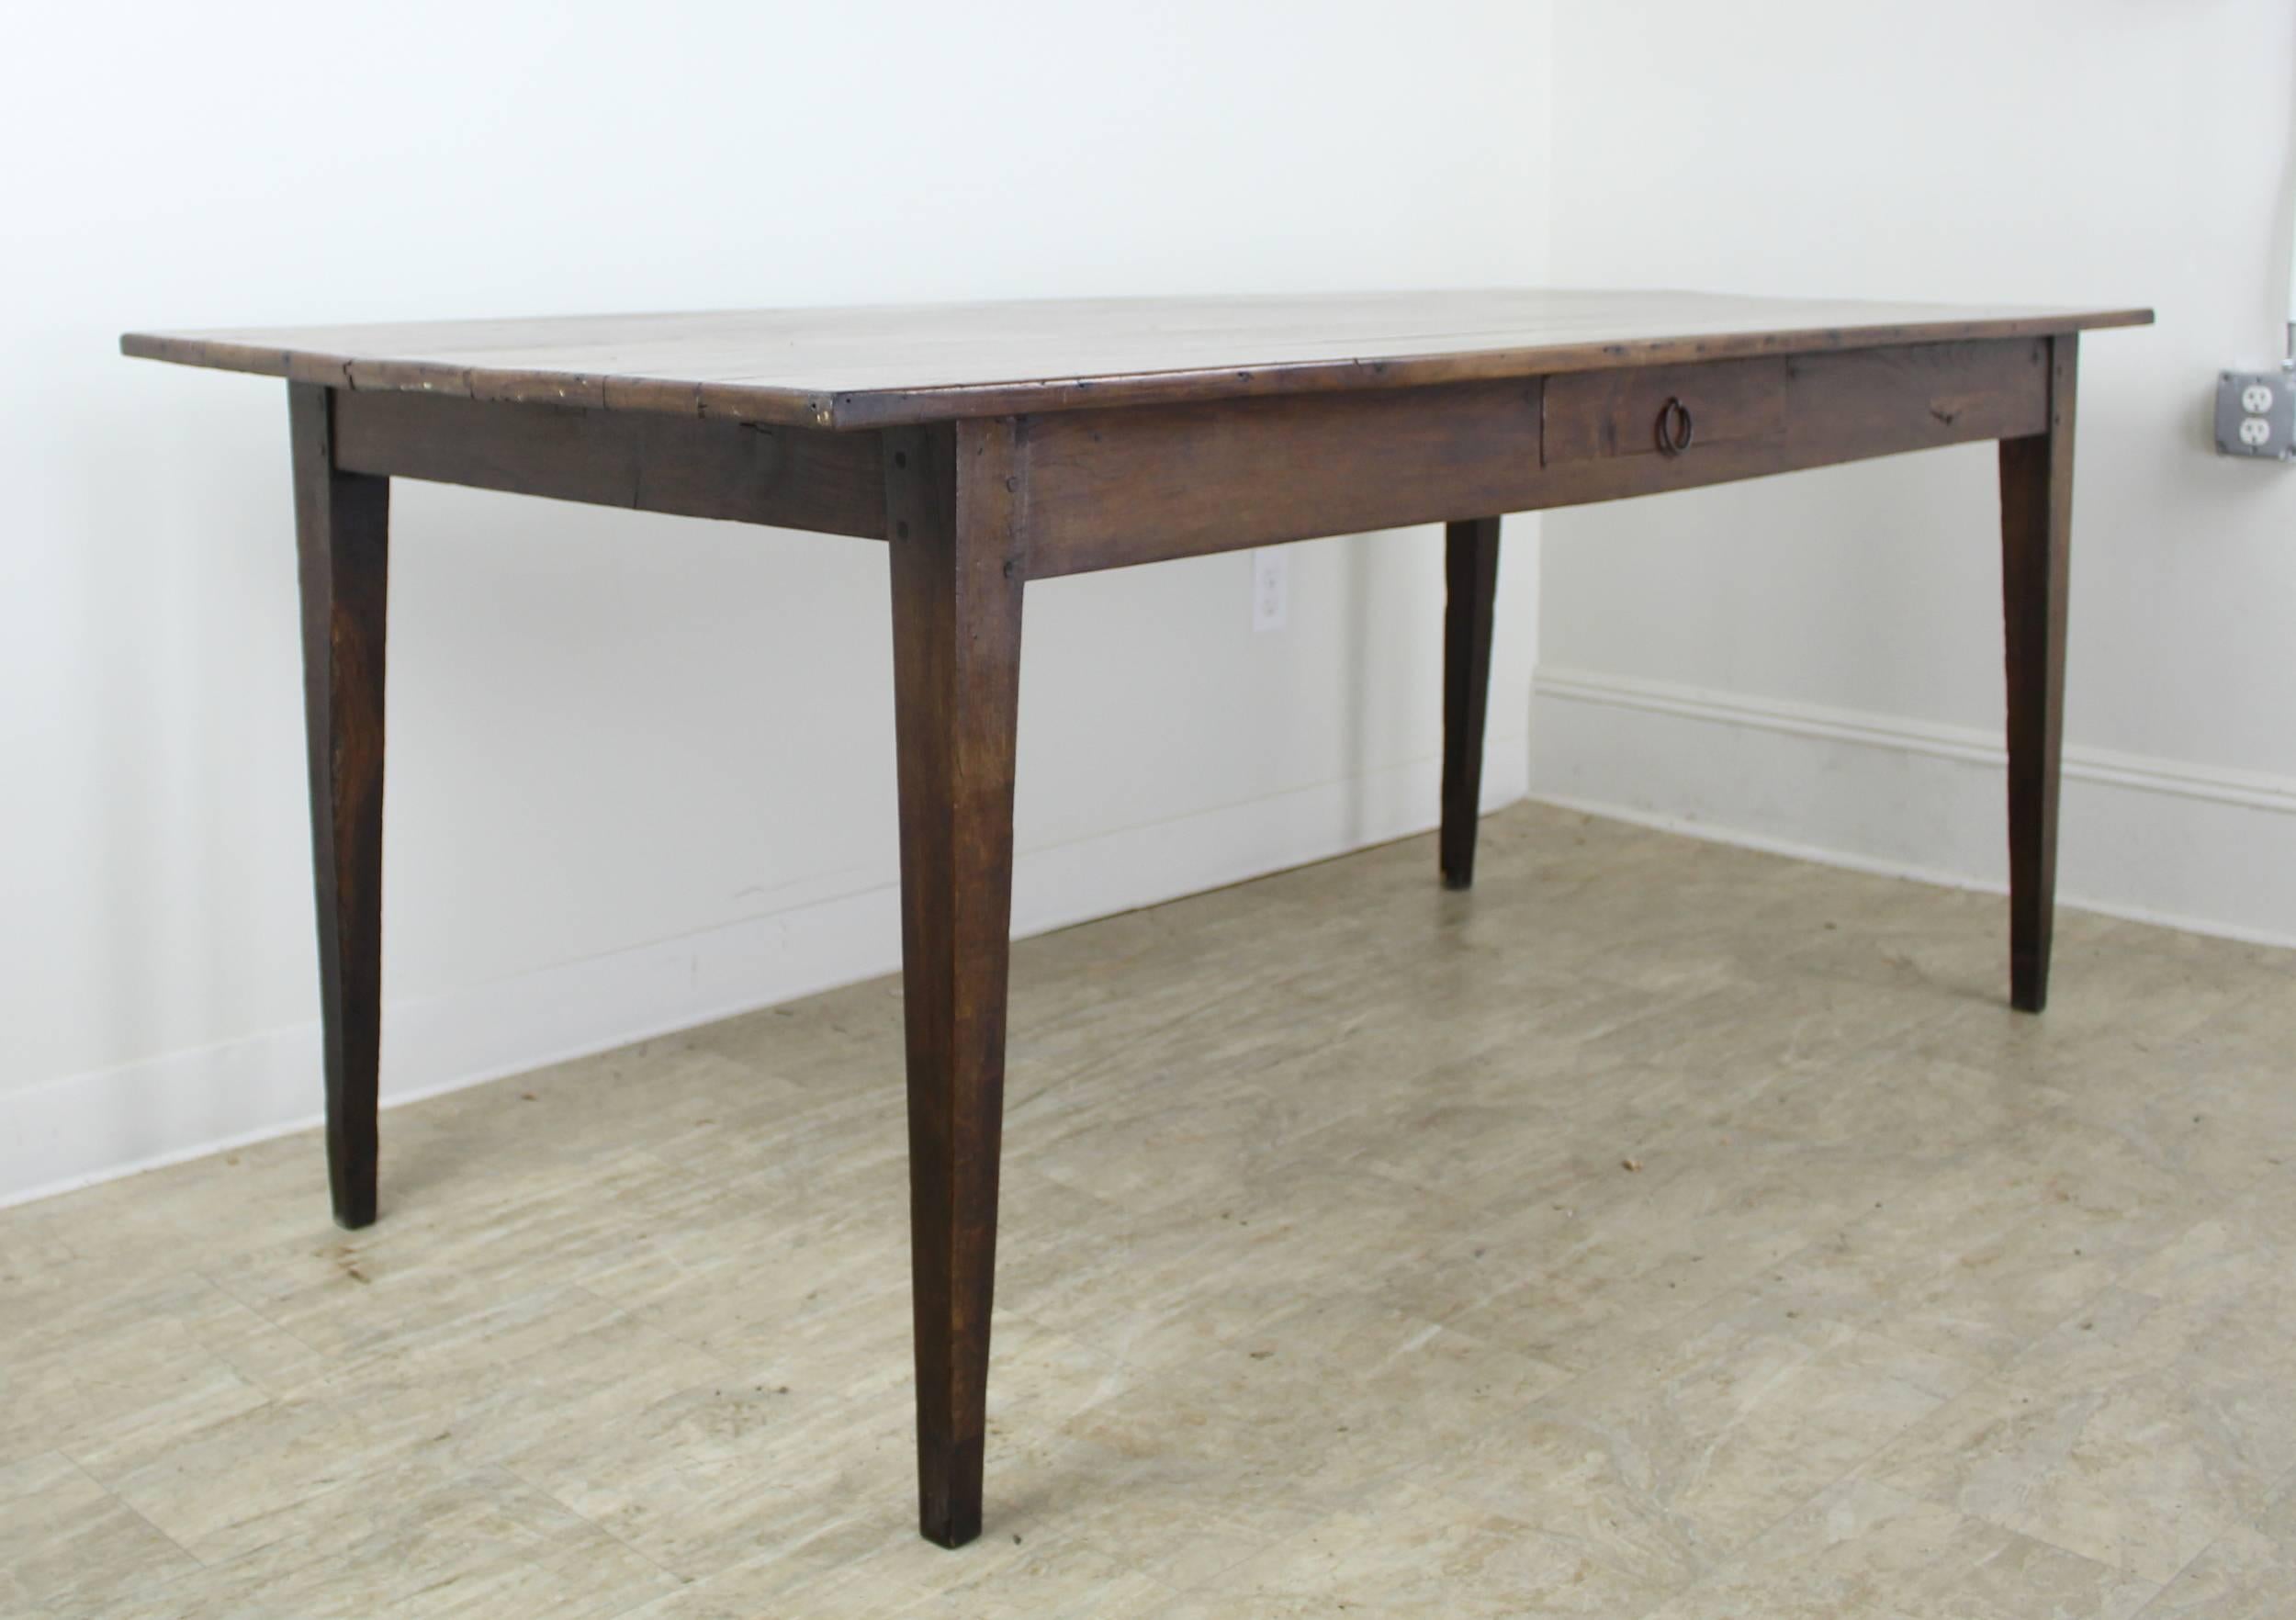 A lovely warm cherry farm table with a very good depth for a piece of its age. Between the 35 inch depth and the 25.75 inch apron height, lots of room for knees! Pretty color and patina with age appropriate distress and classic slim tapered legs.